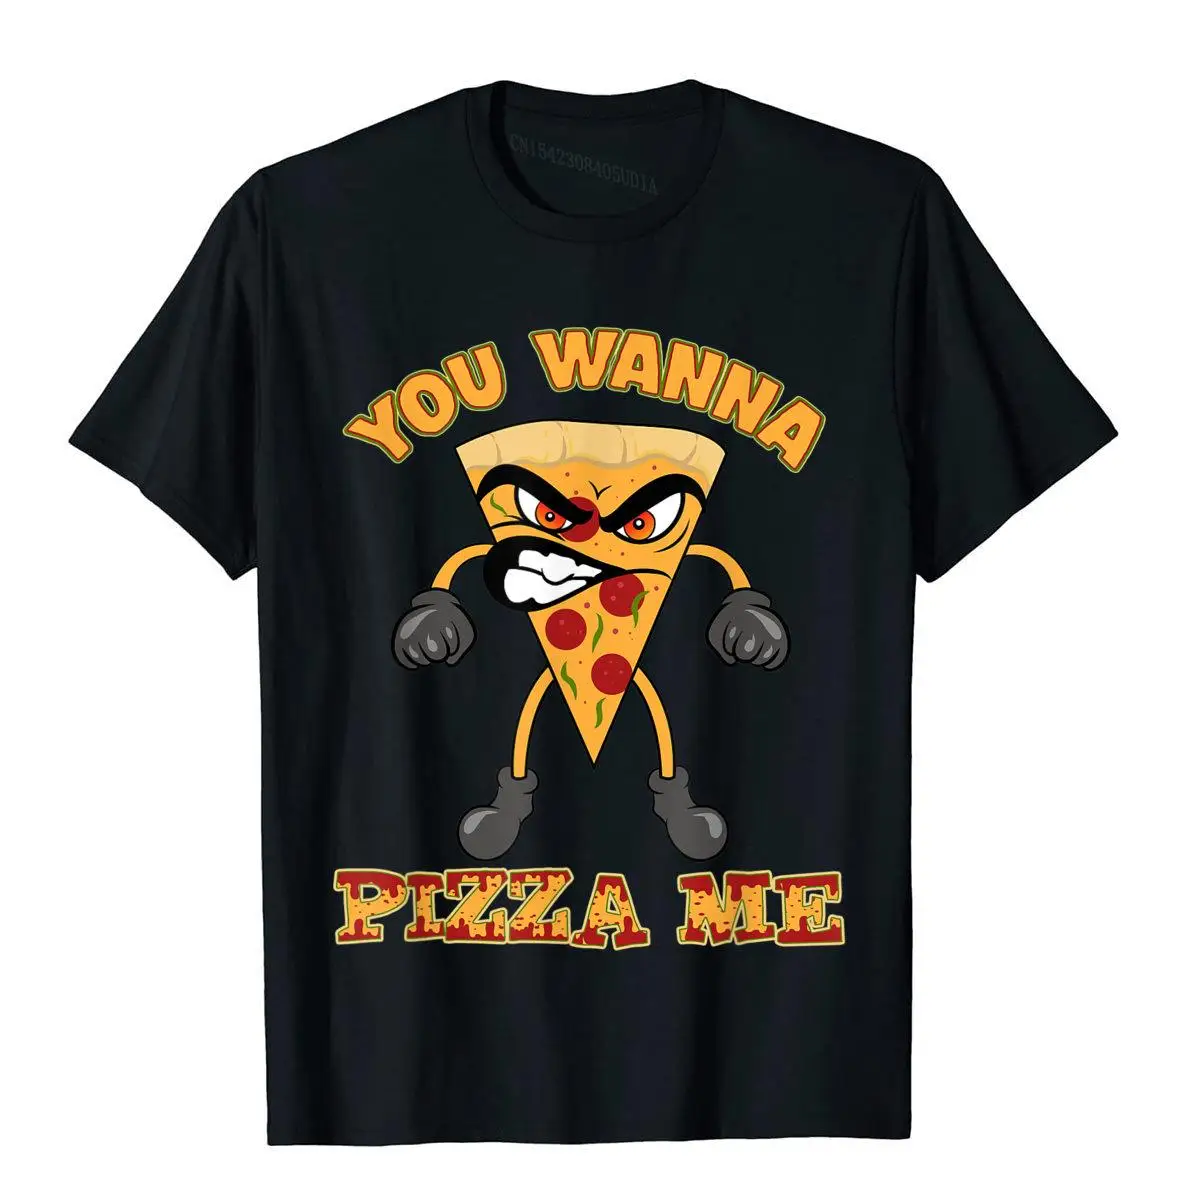 

You Wanna Pizza Me T-Shirt Funny Talking Pizza Slice T-Shirt Cotton Top T-Shirts For Men Printing Tees Prevalent Summer